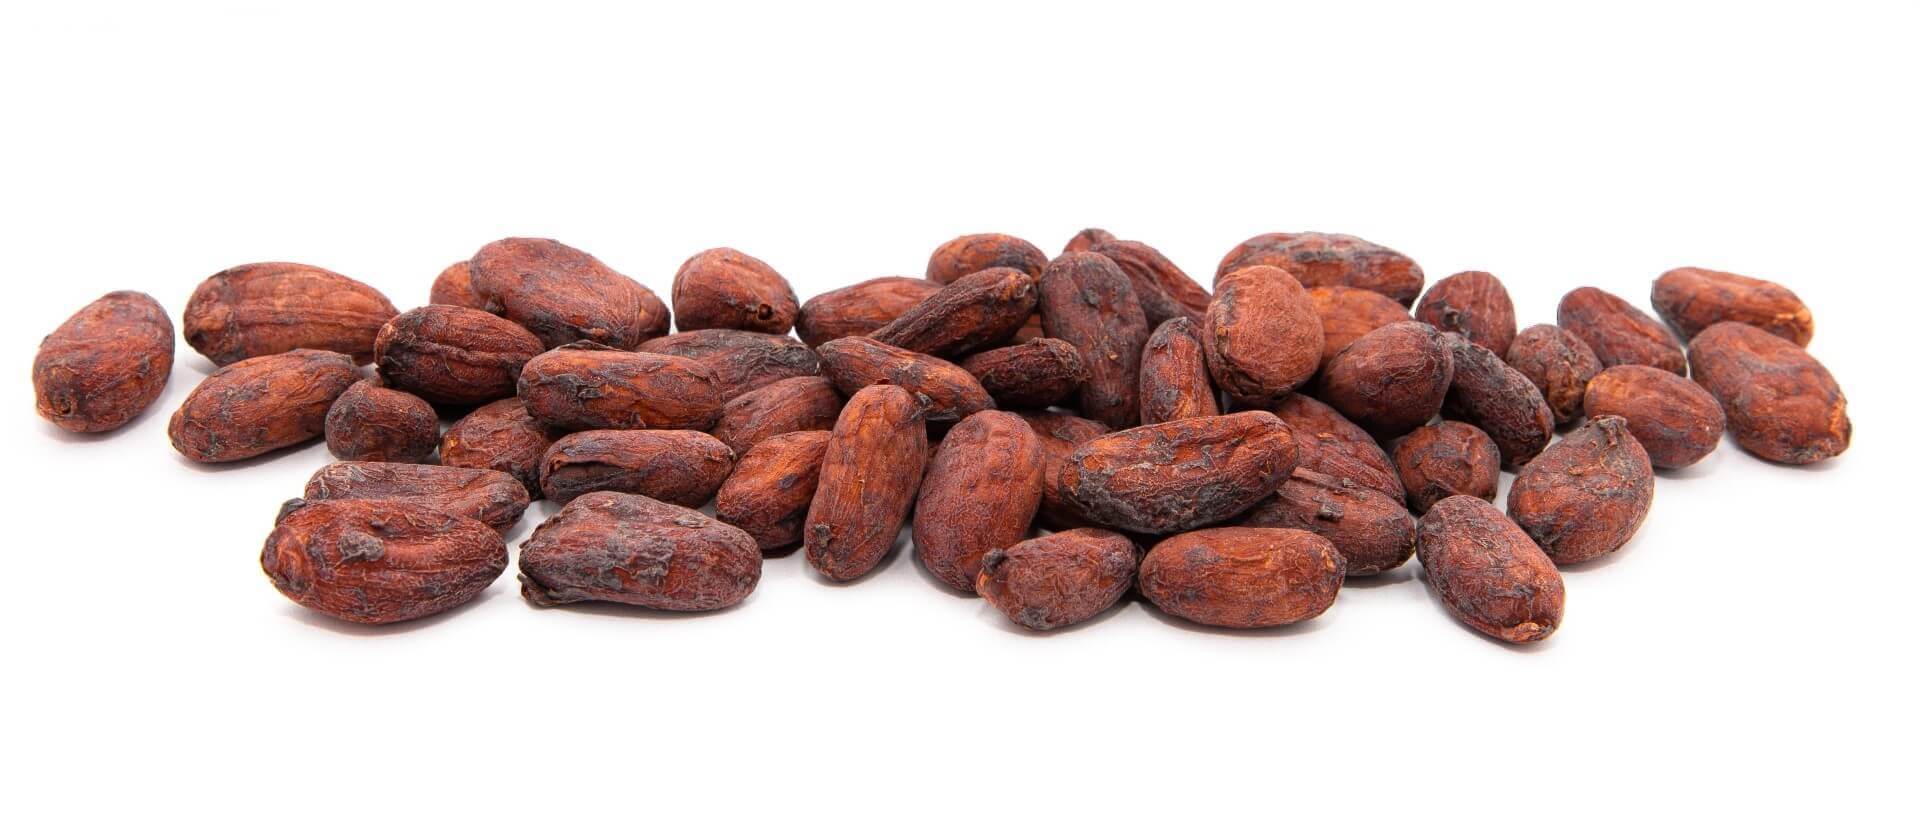 Cacao beans with an  identity!